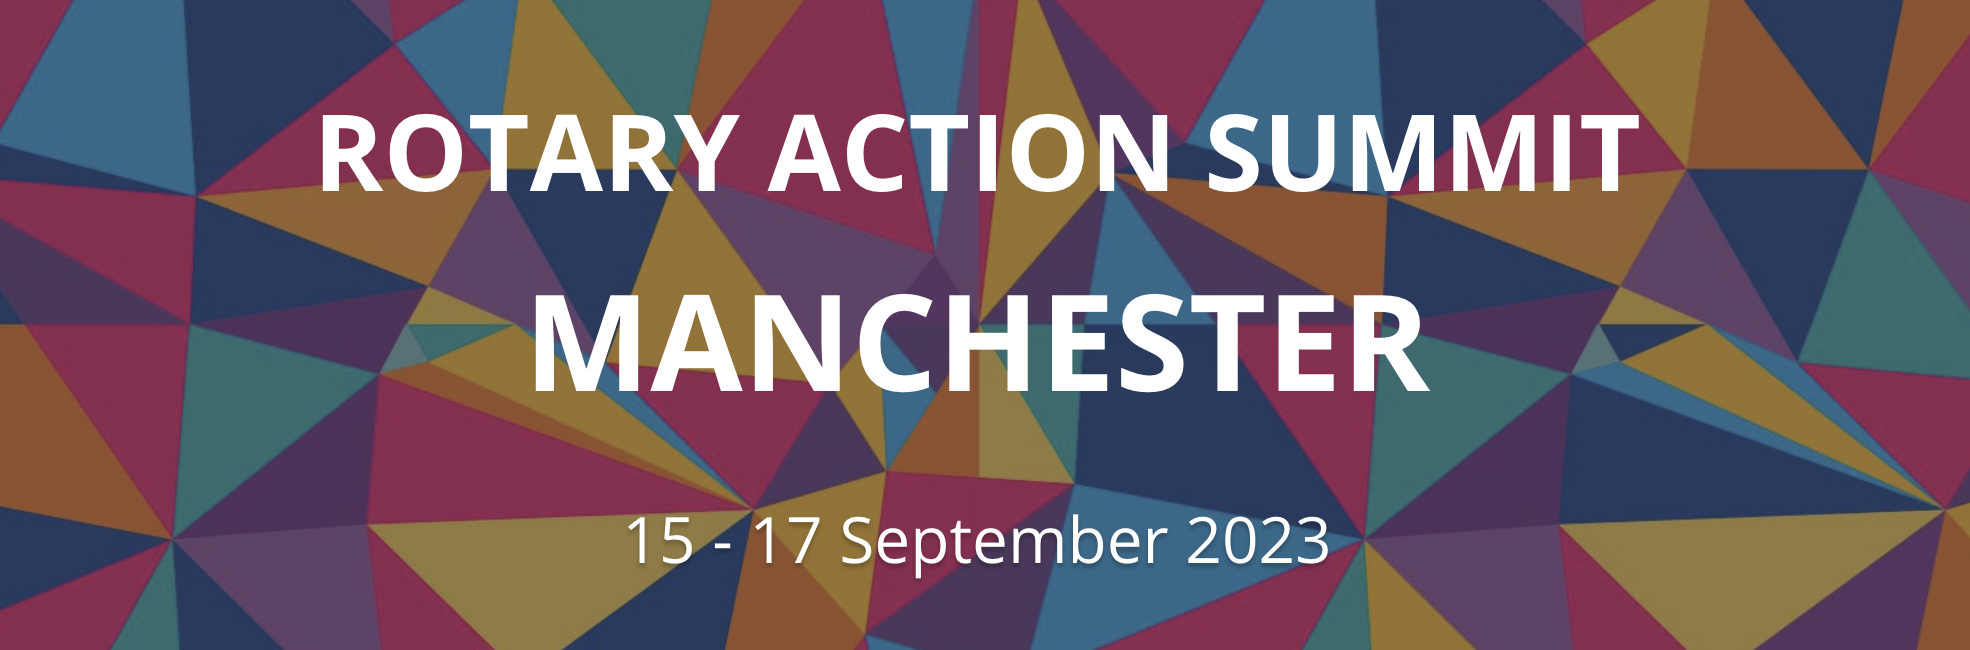 Rotary Action Summit Manchester